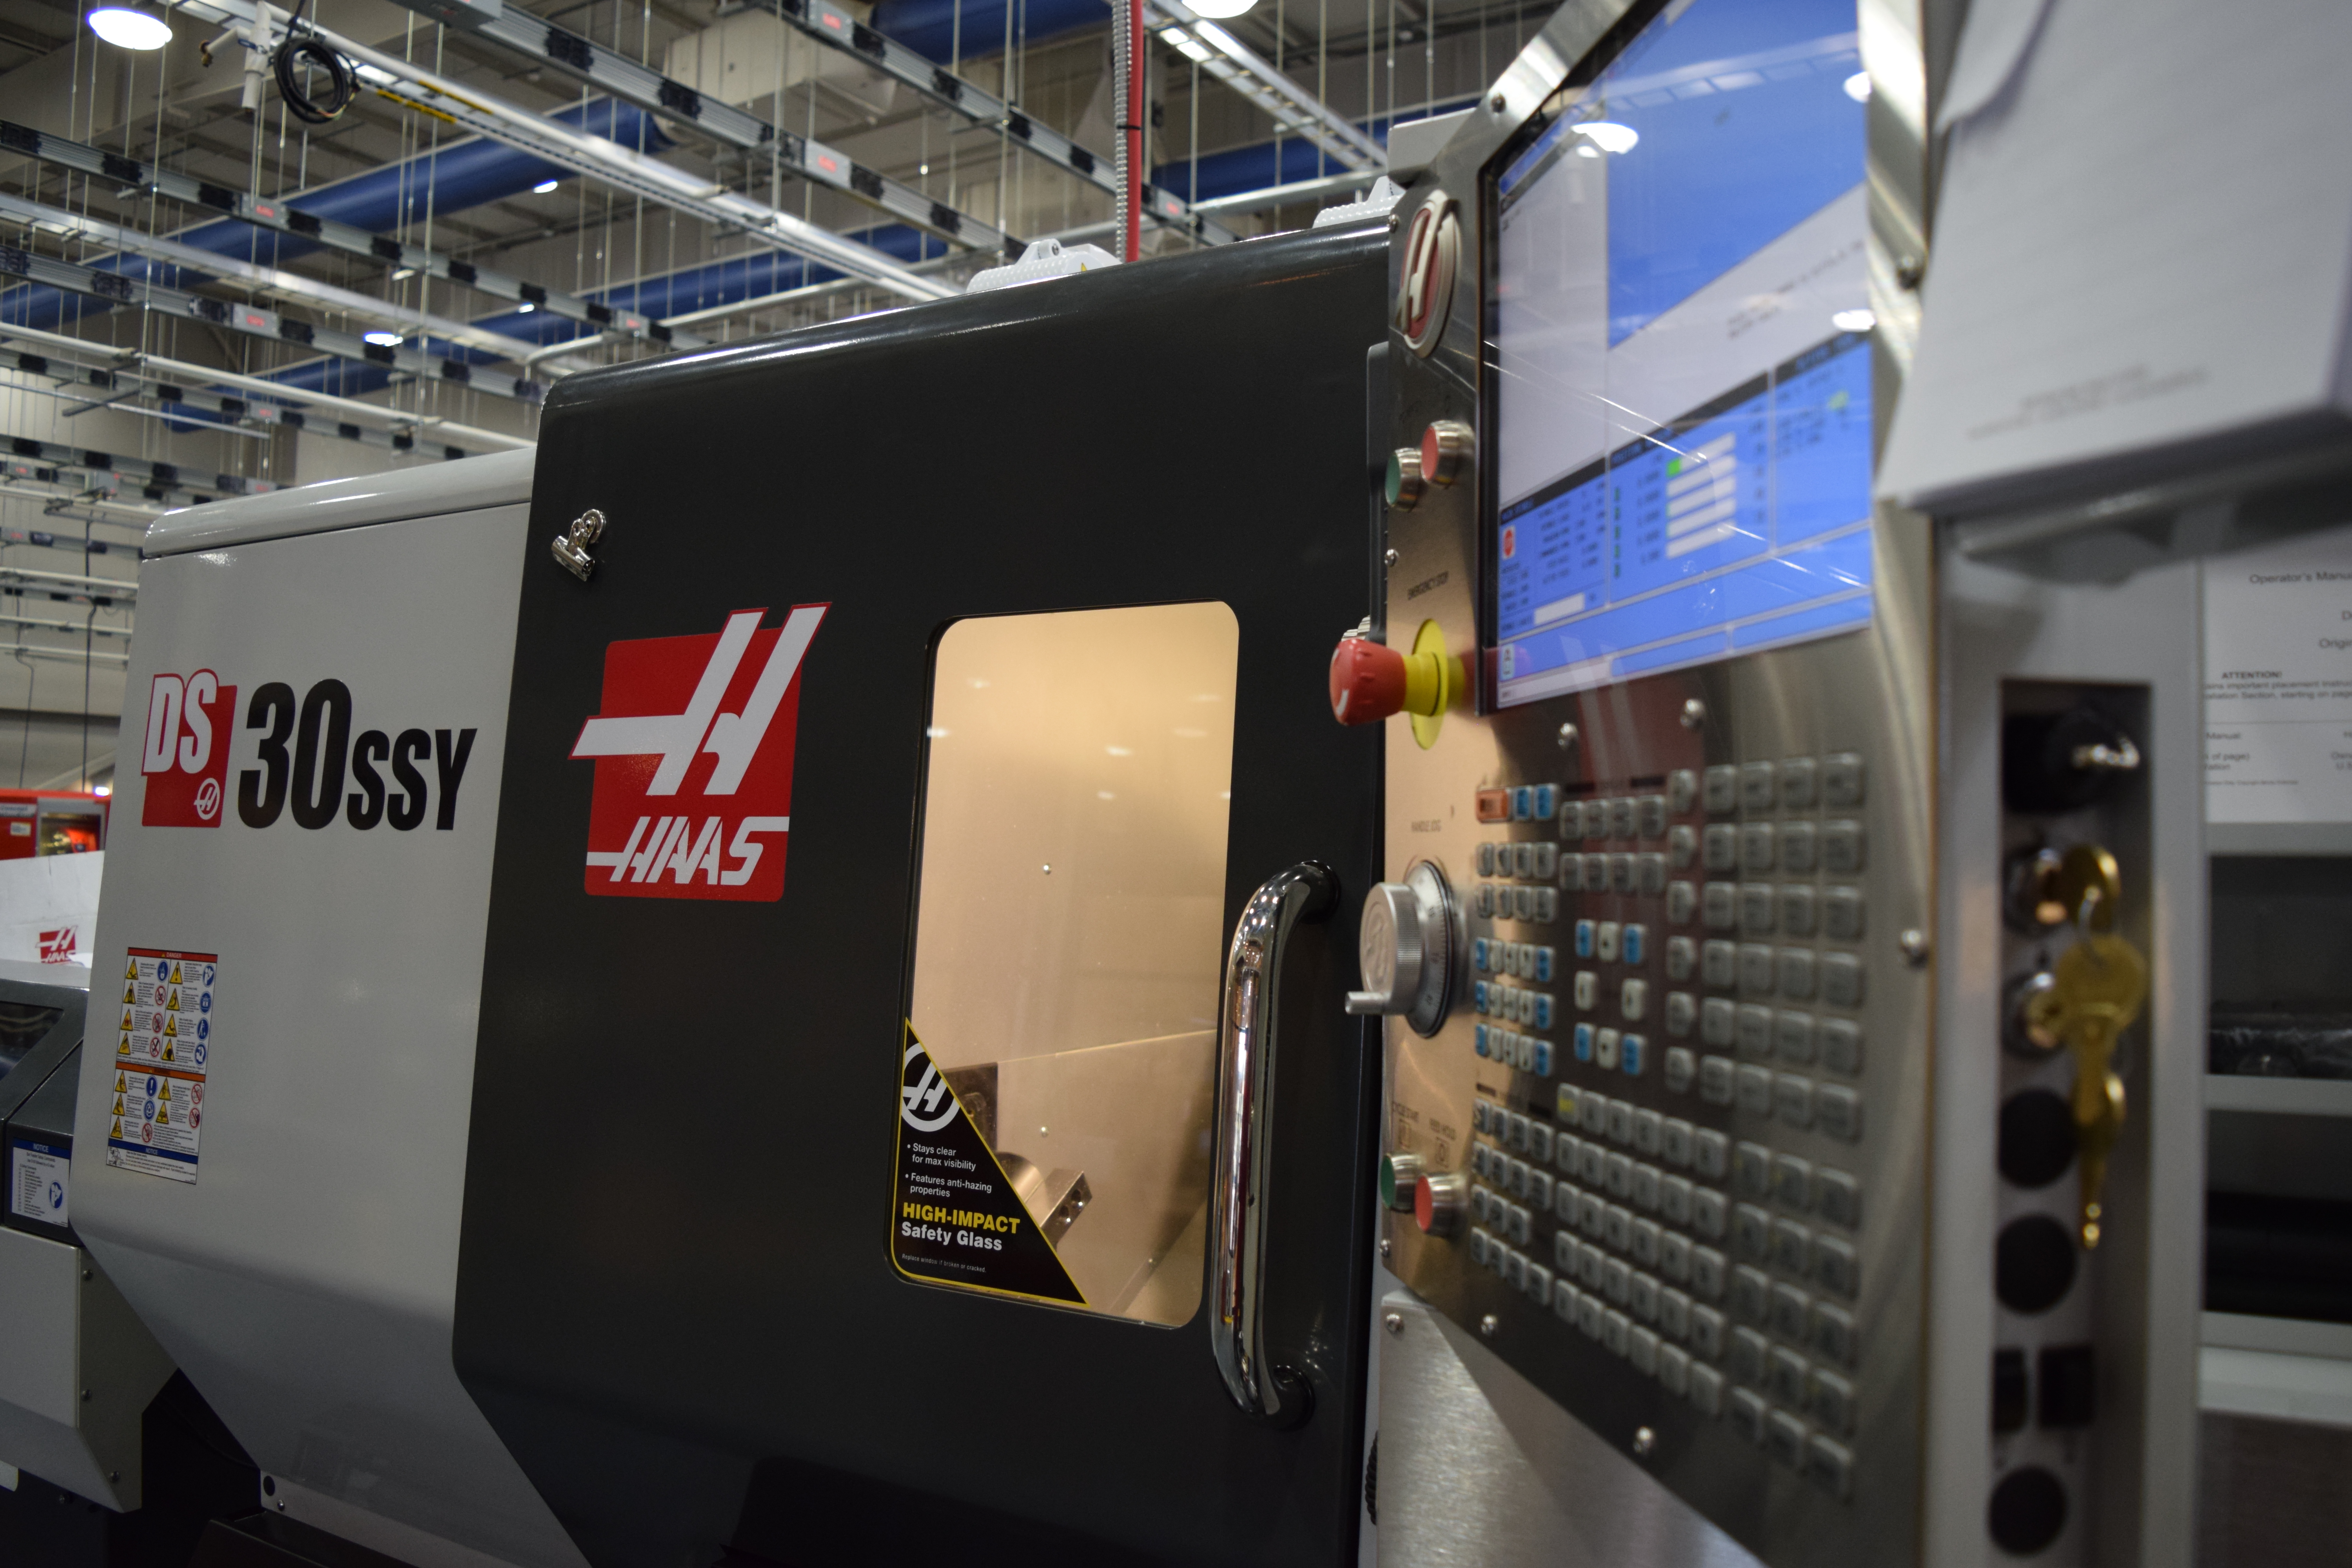 HAAS DS30ssy machine